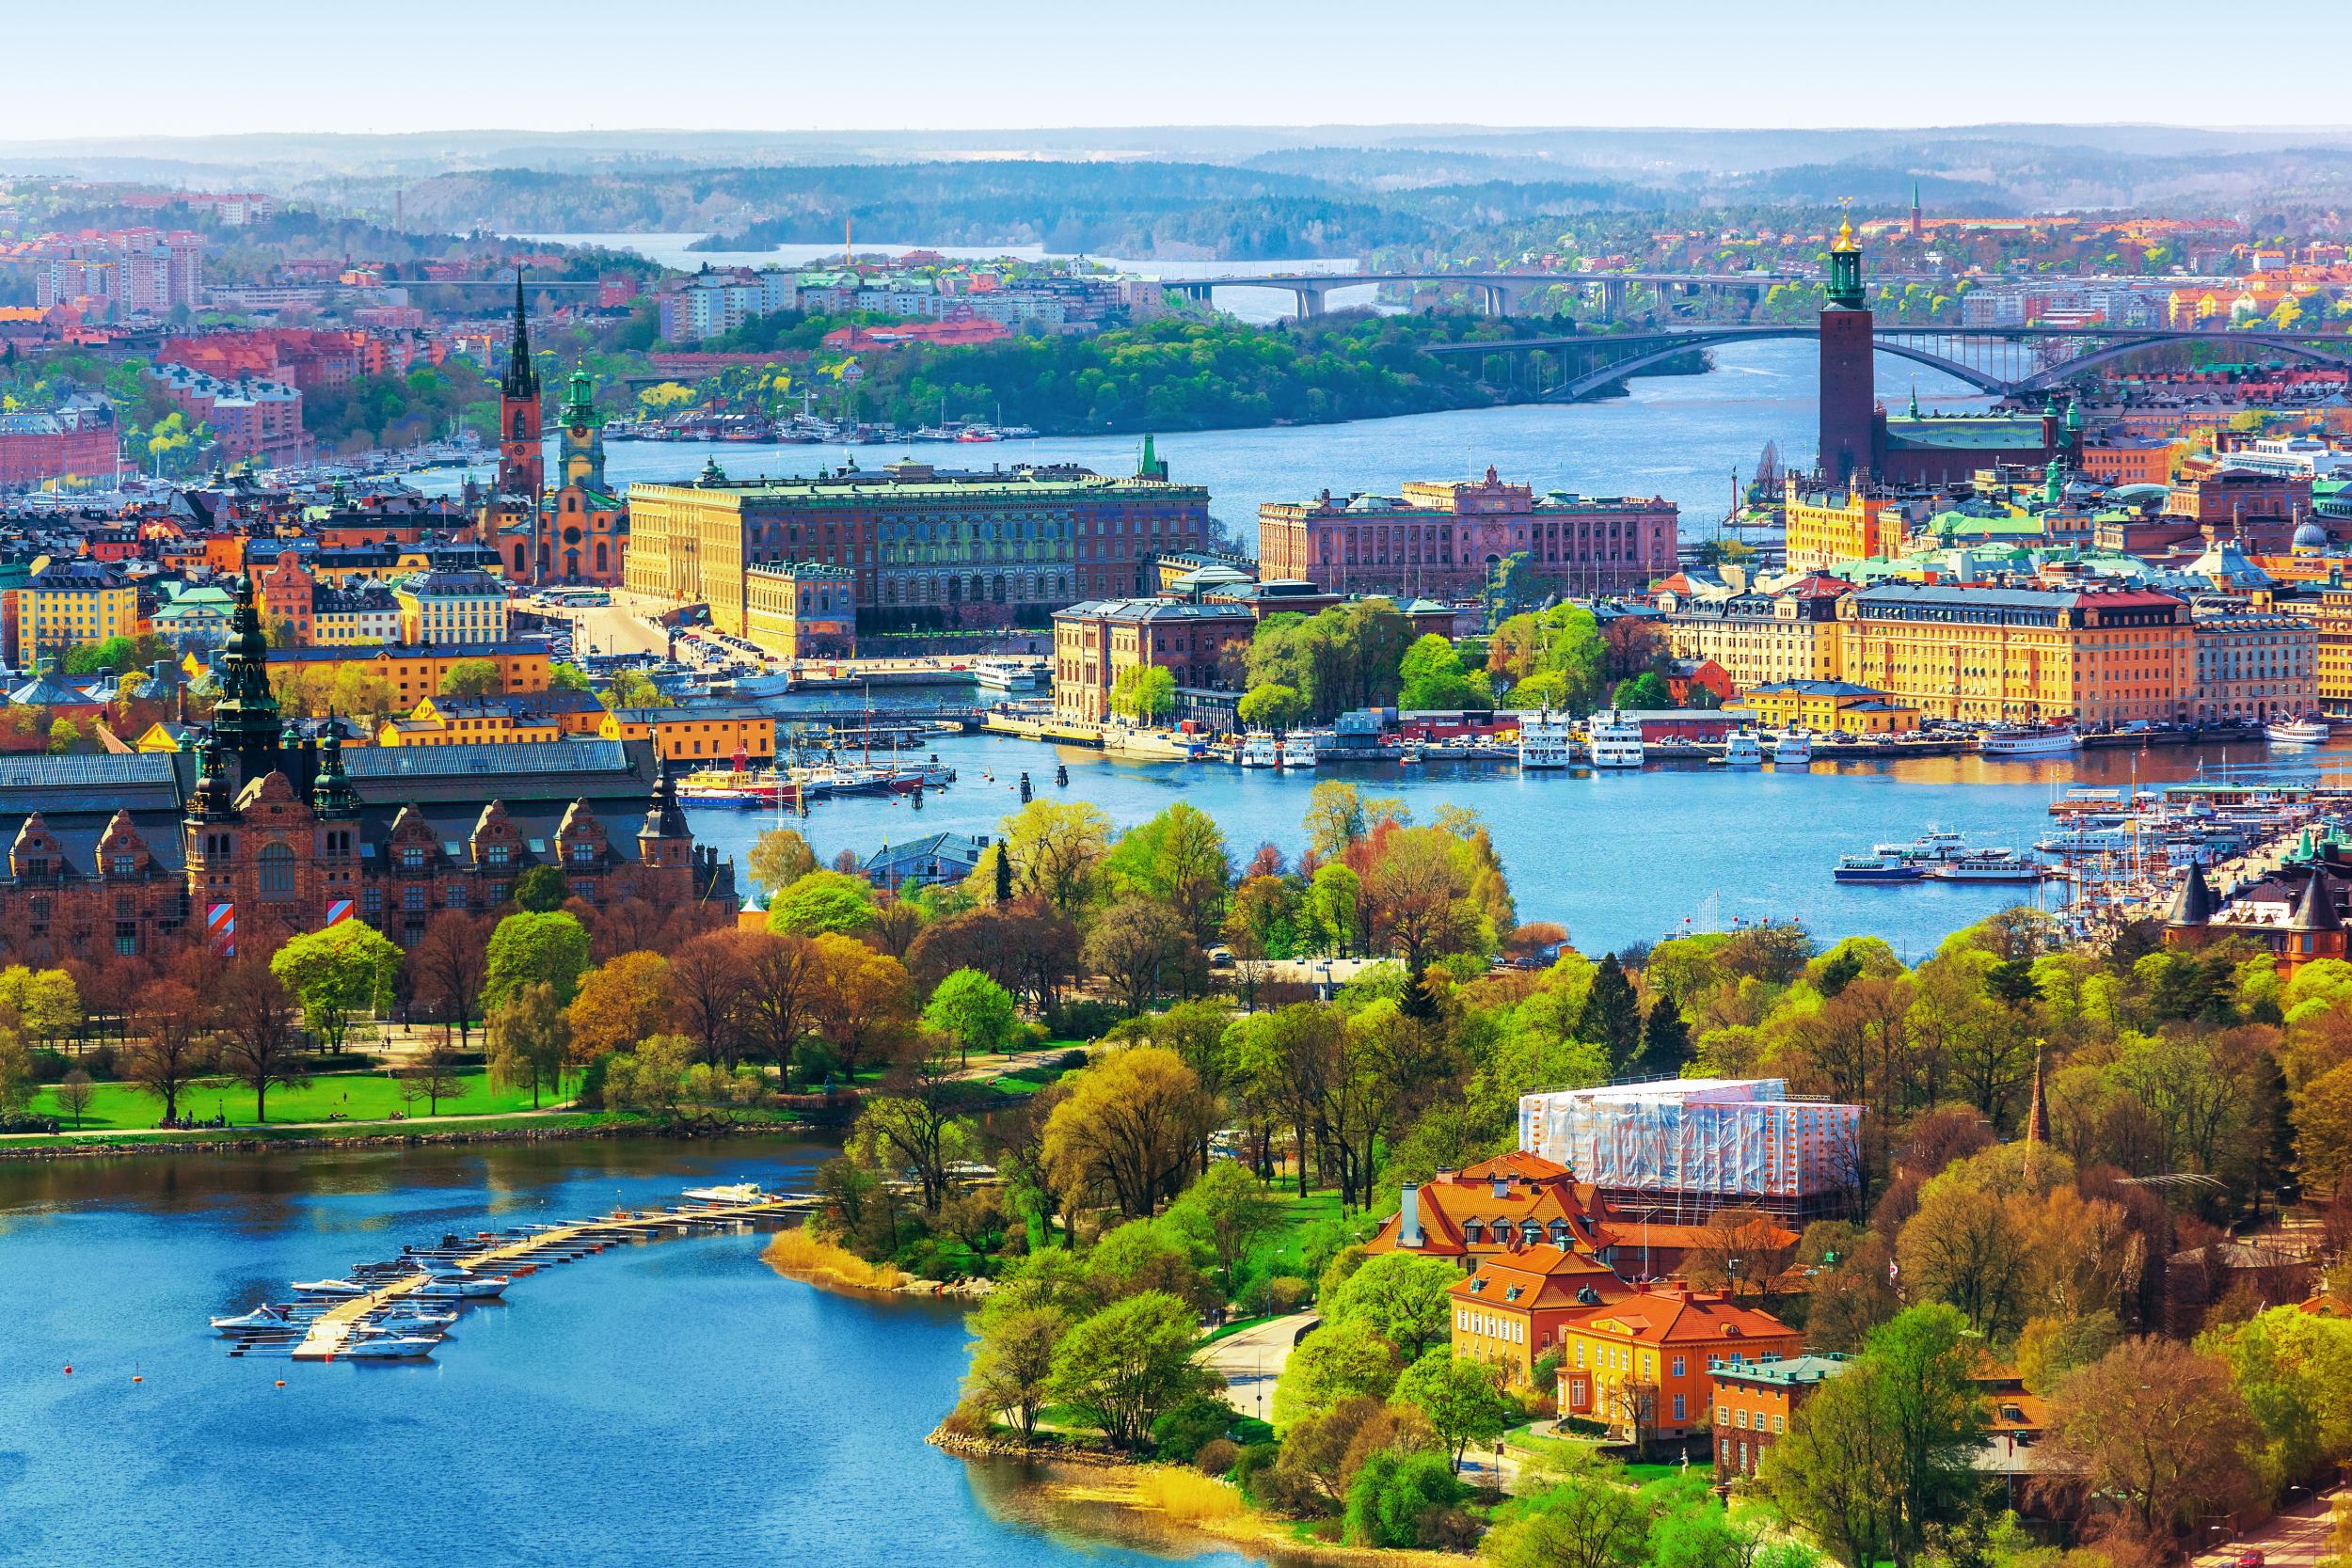 <p>Known as “The Beauty on the Water”, Stockholm is built on 14 islands</p>